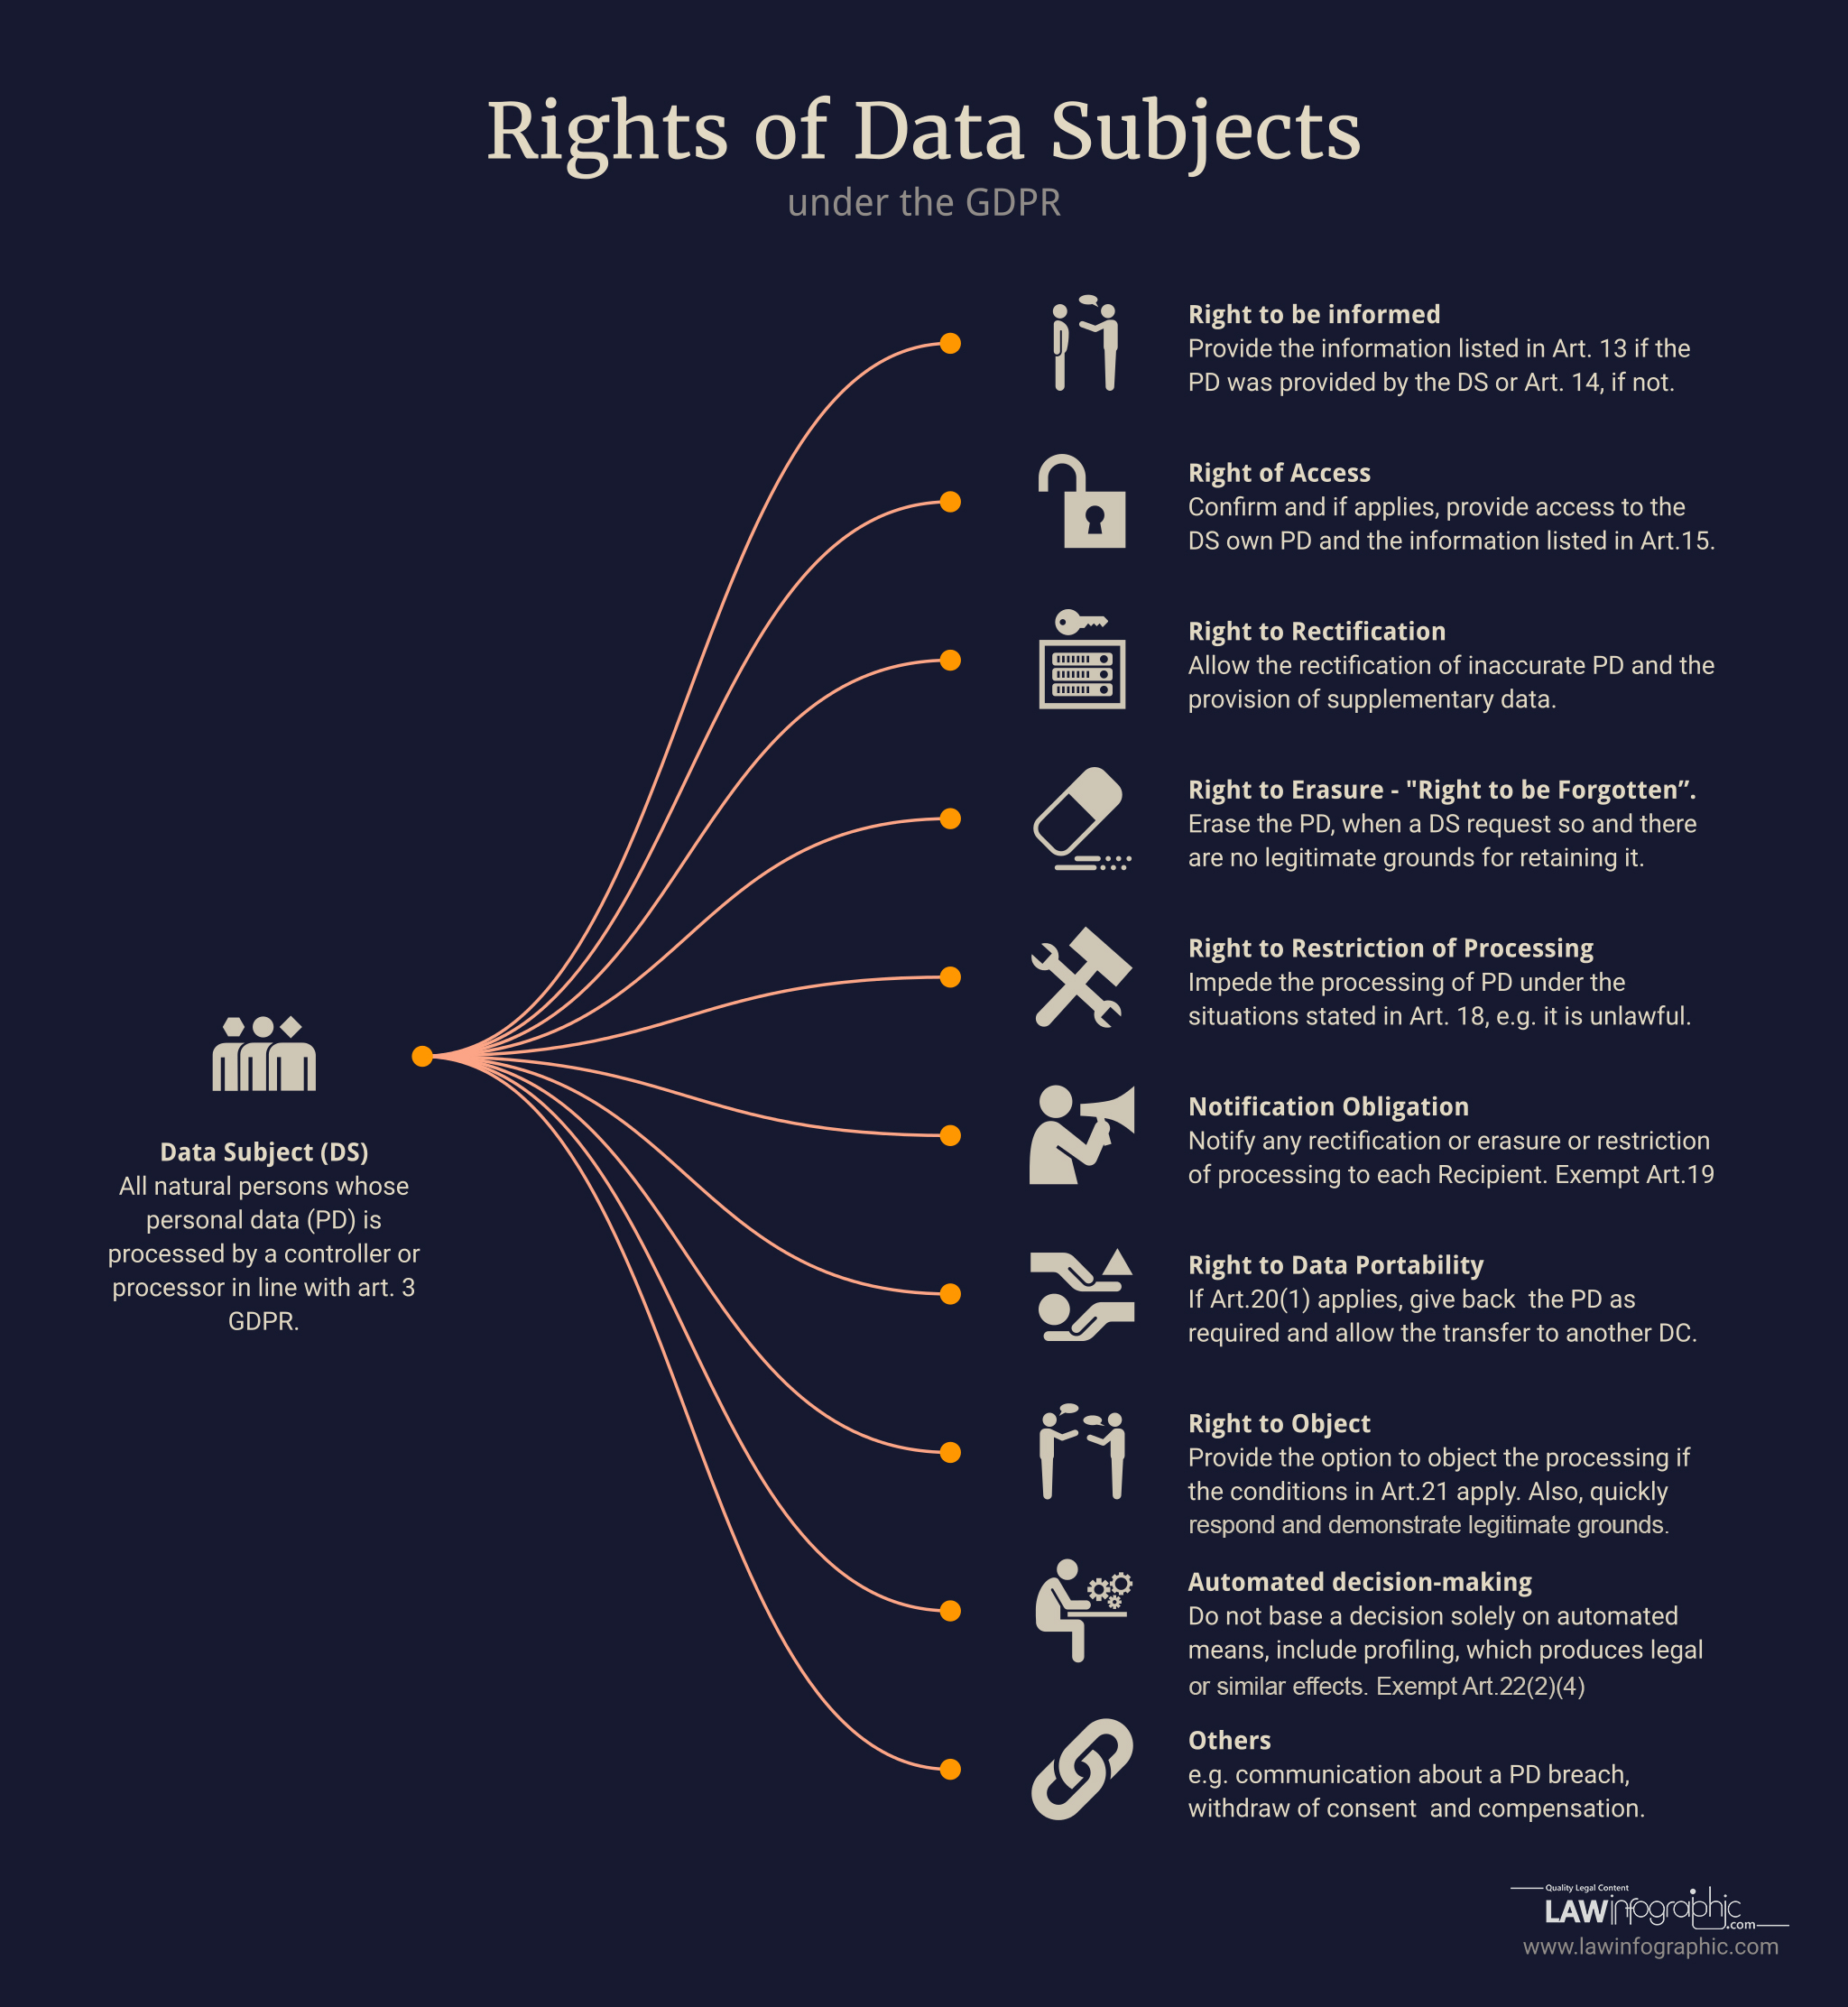 Rights of Data Subjects under the GDPR - Infographic designe